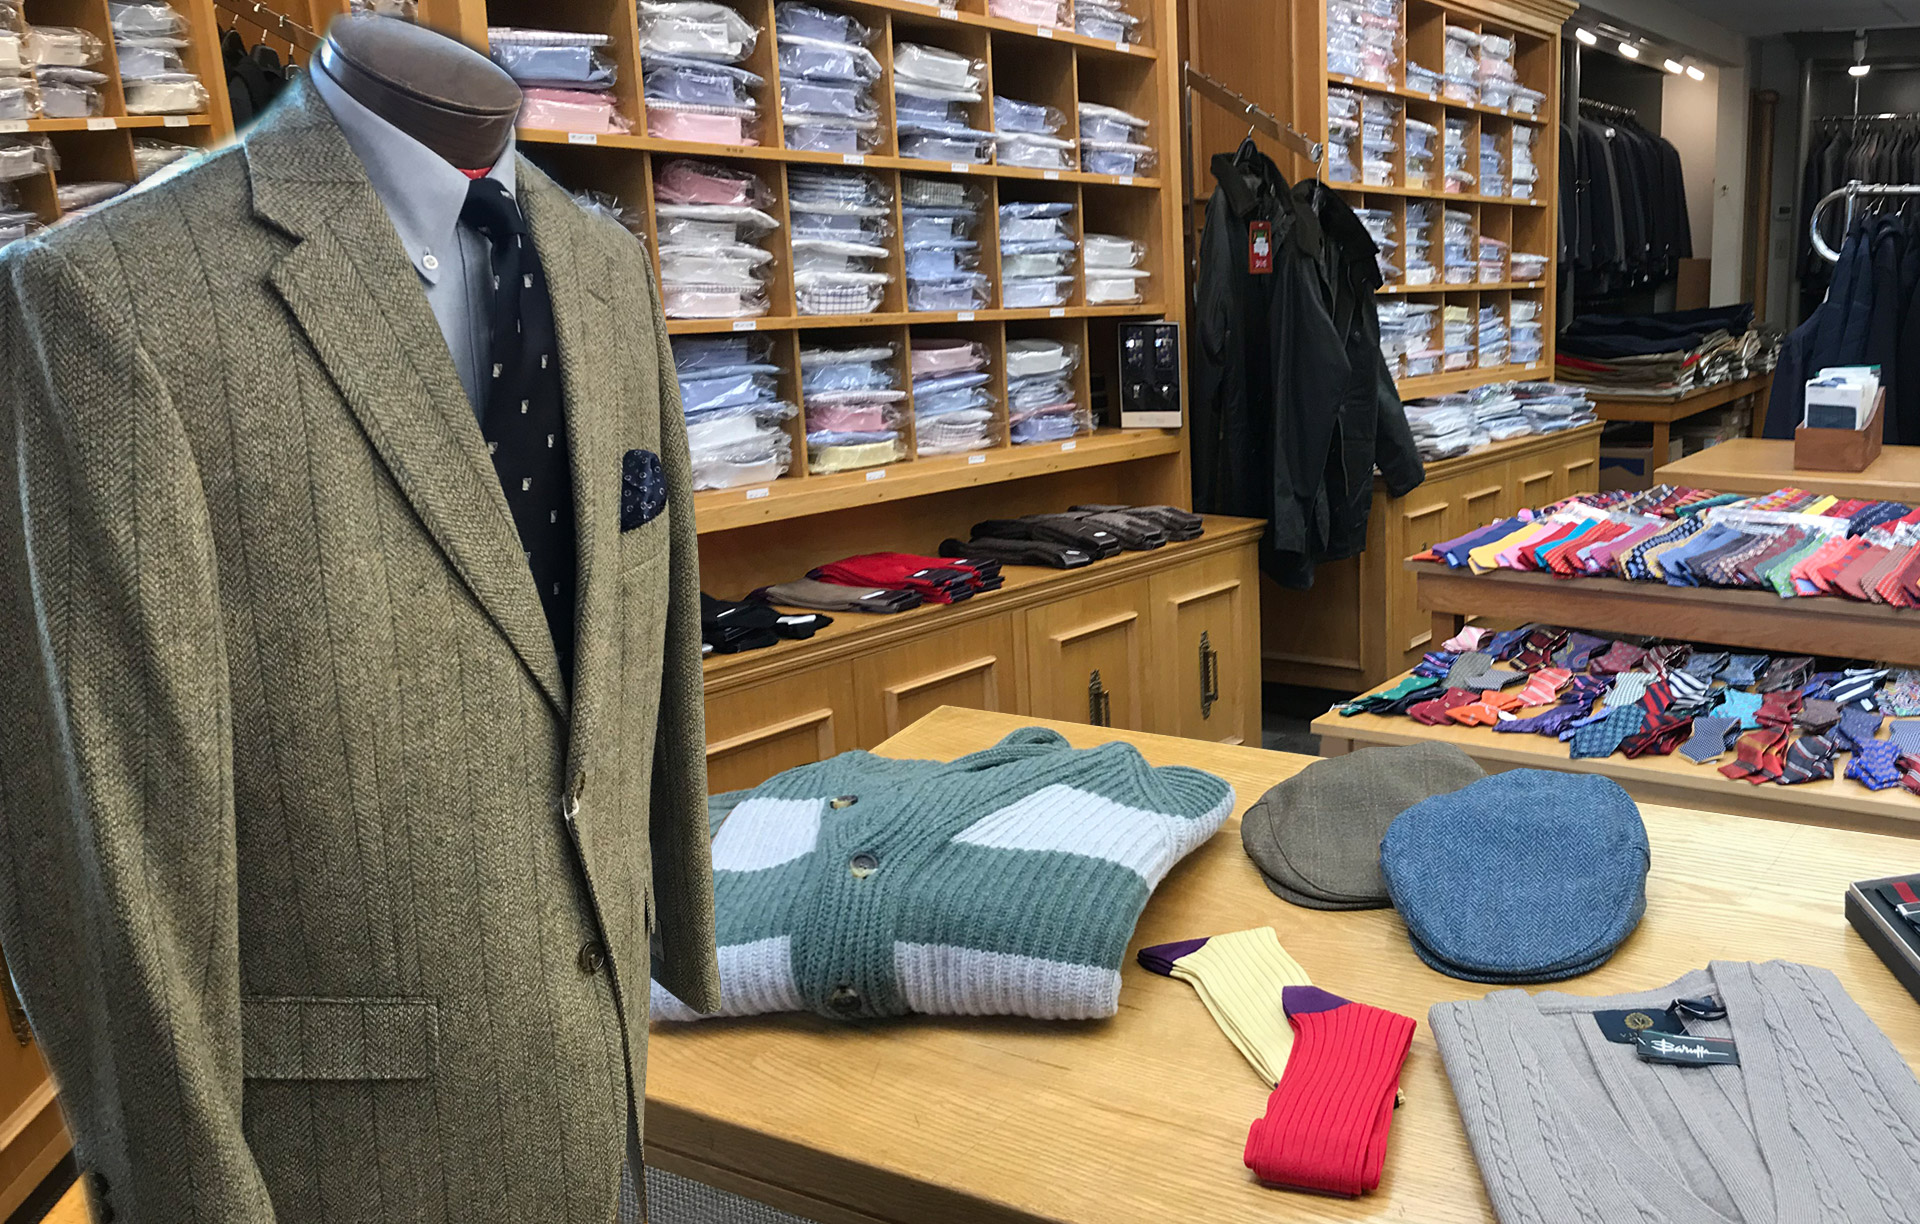 Eddie Jacobs Ltd. store showing sweaters, ties, shirts, and suits